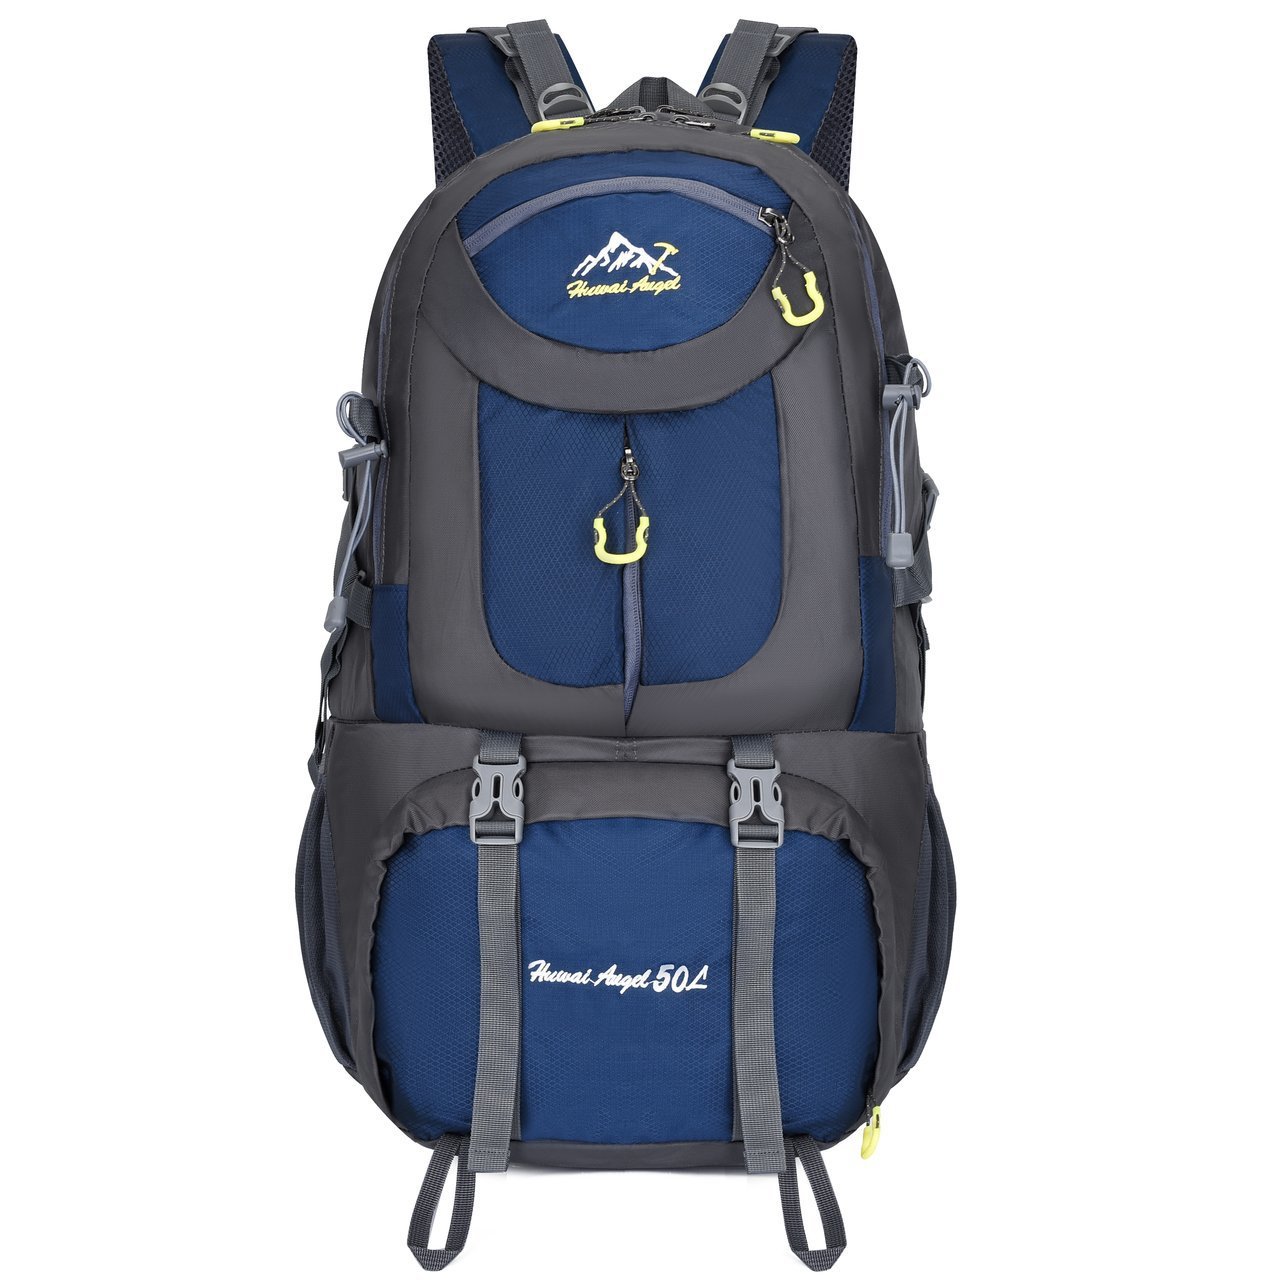 navy blue outdoor sports trekking hiking travel bags backpack